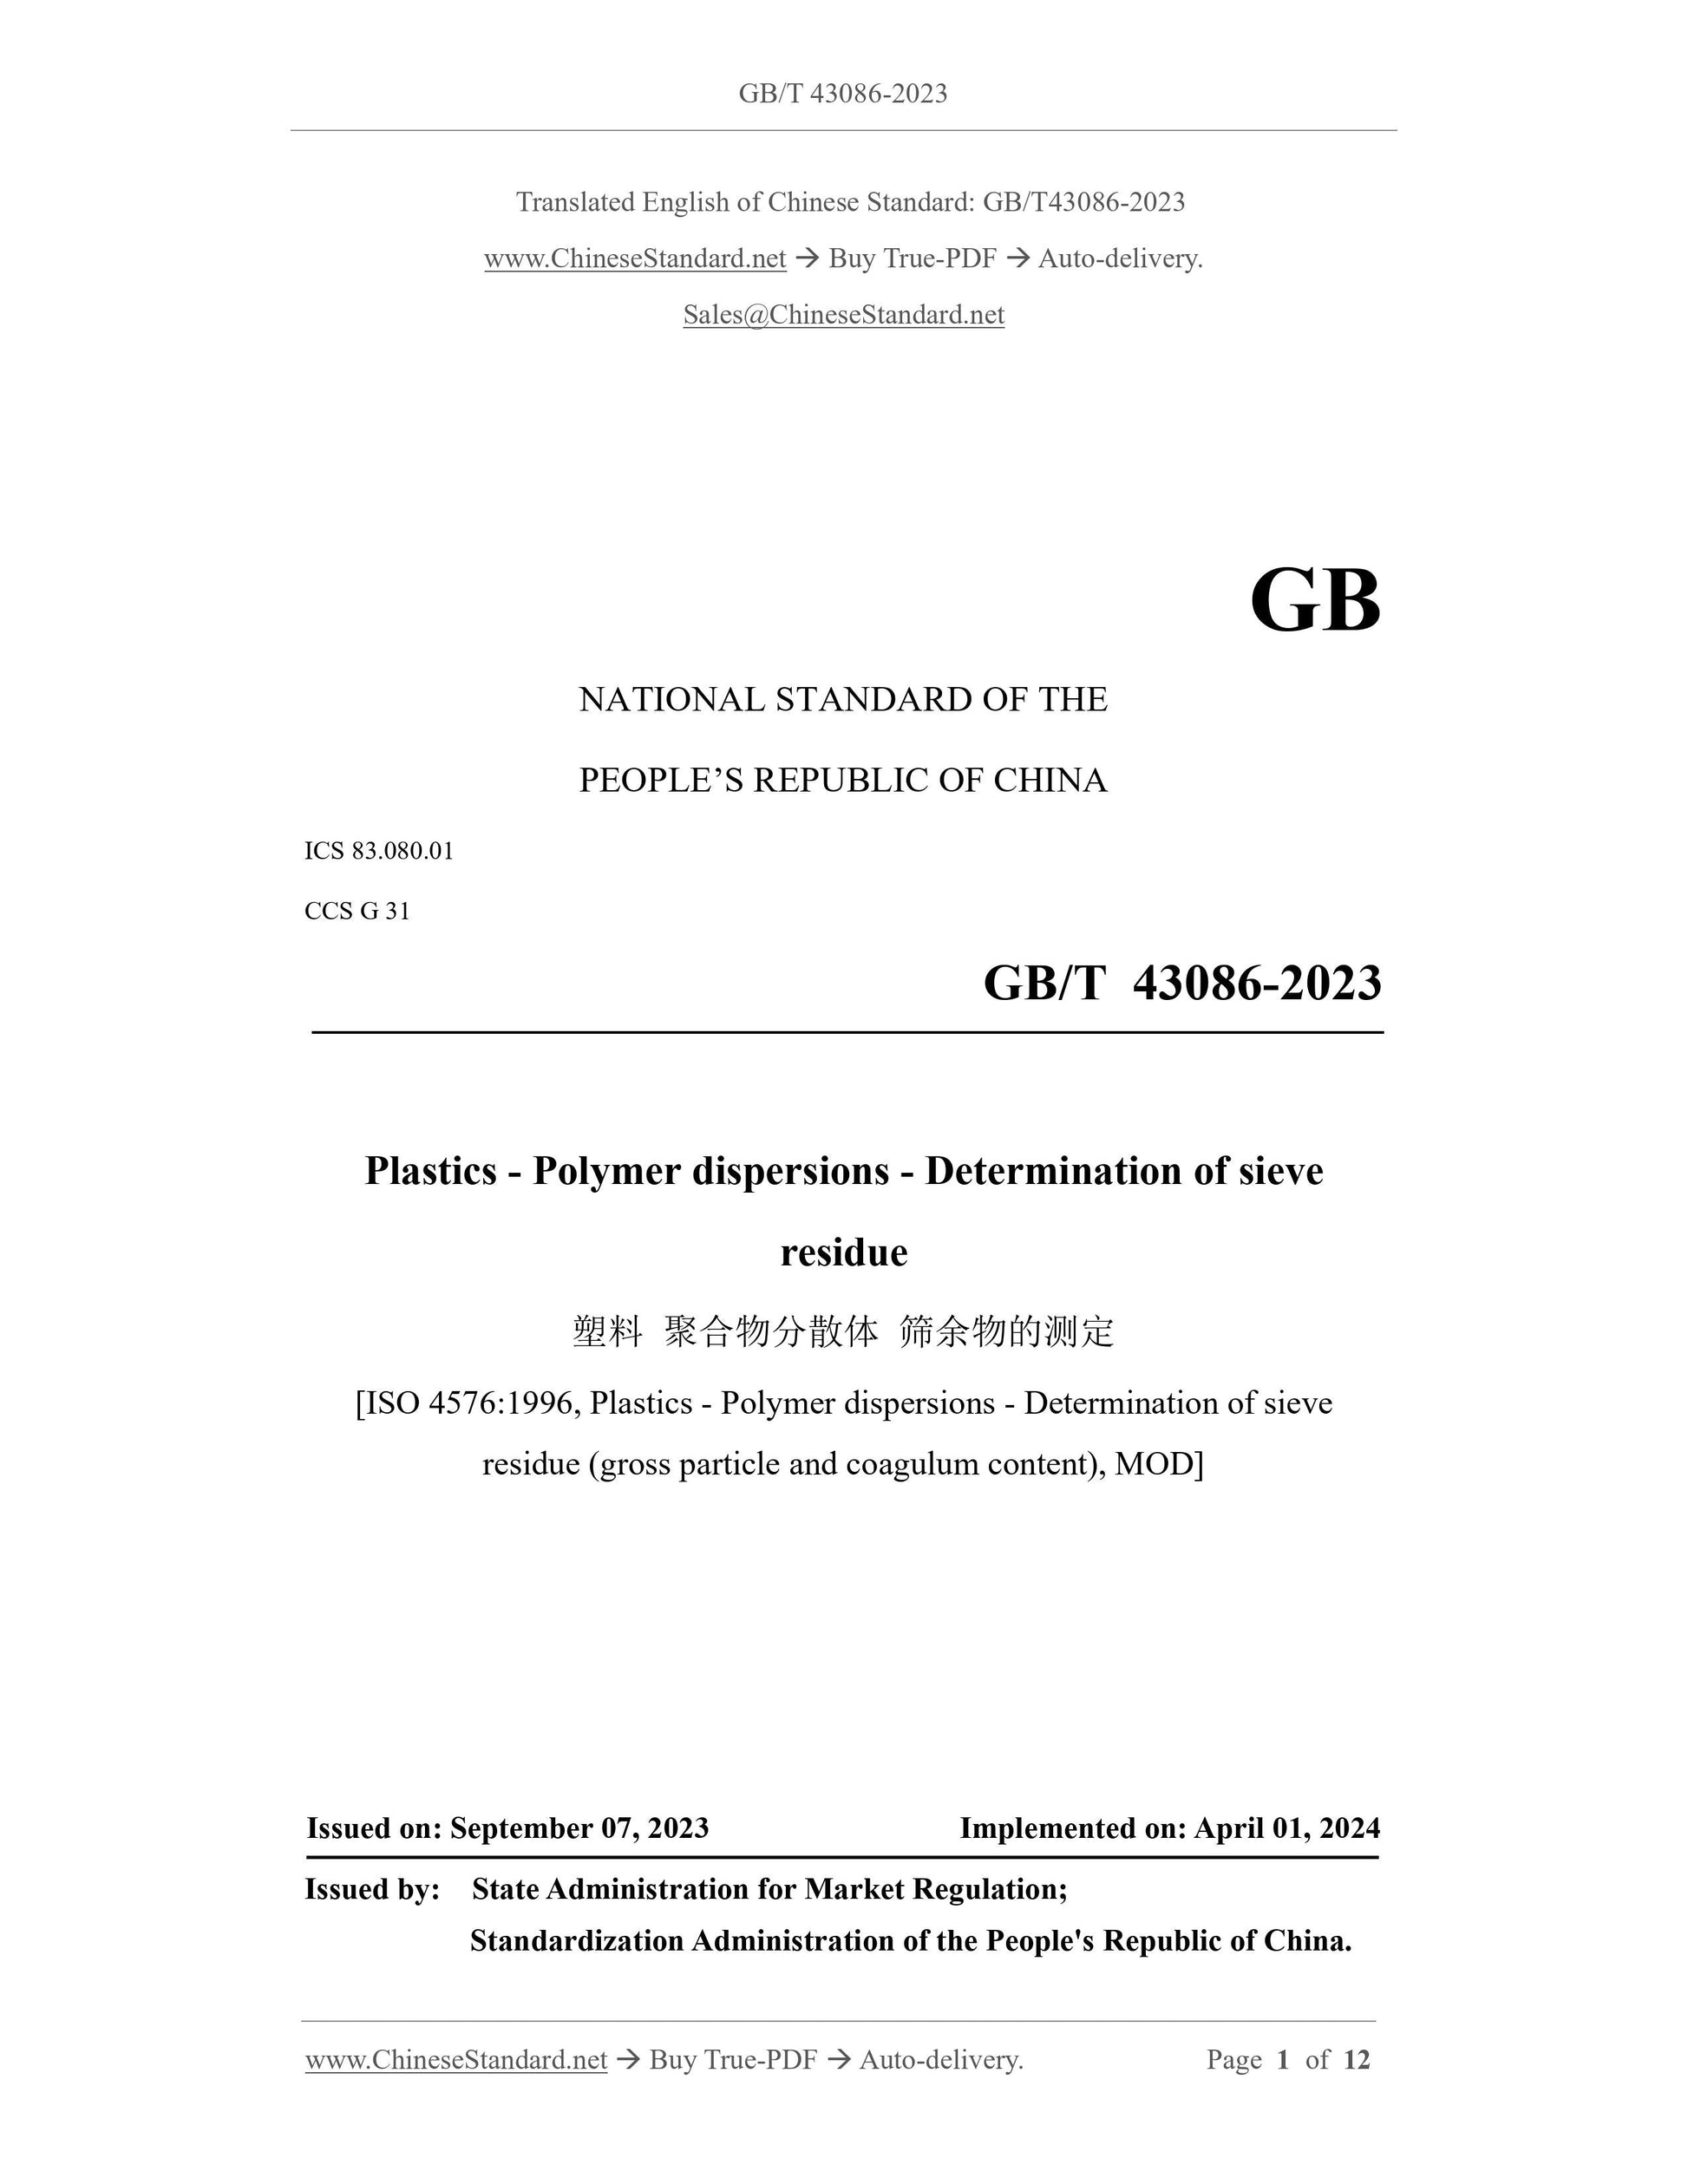 GB/T 43086-2023 Page 1